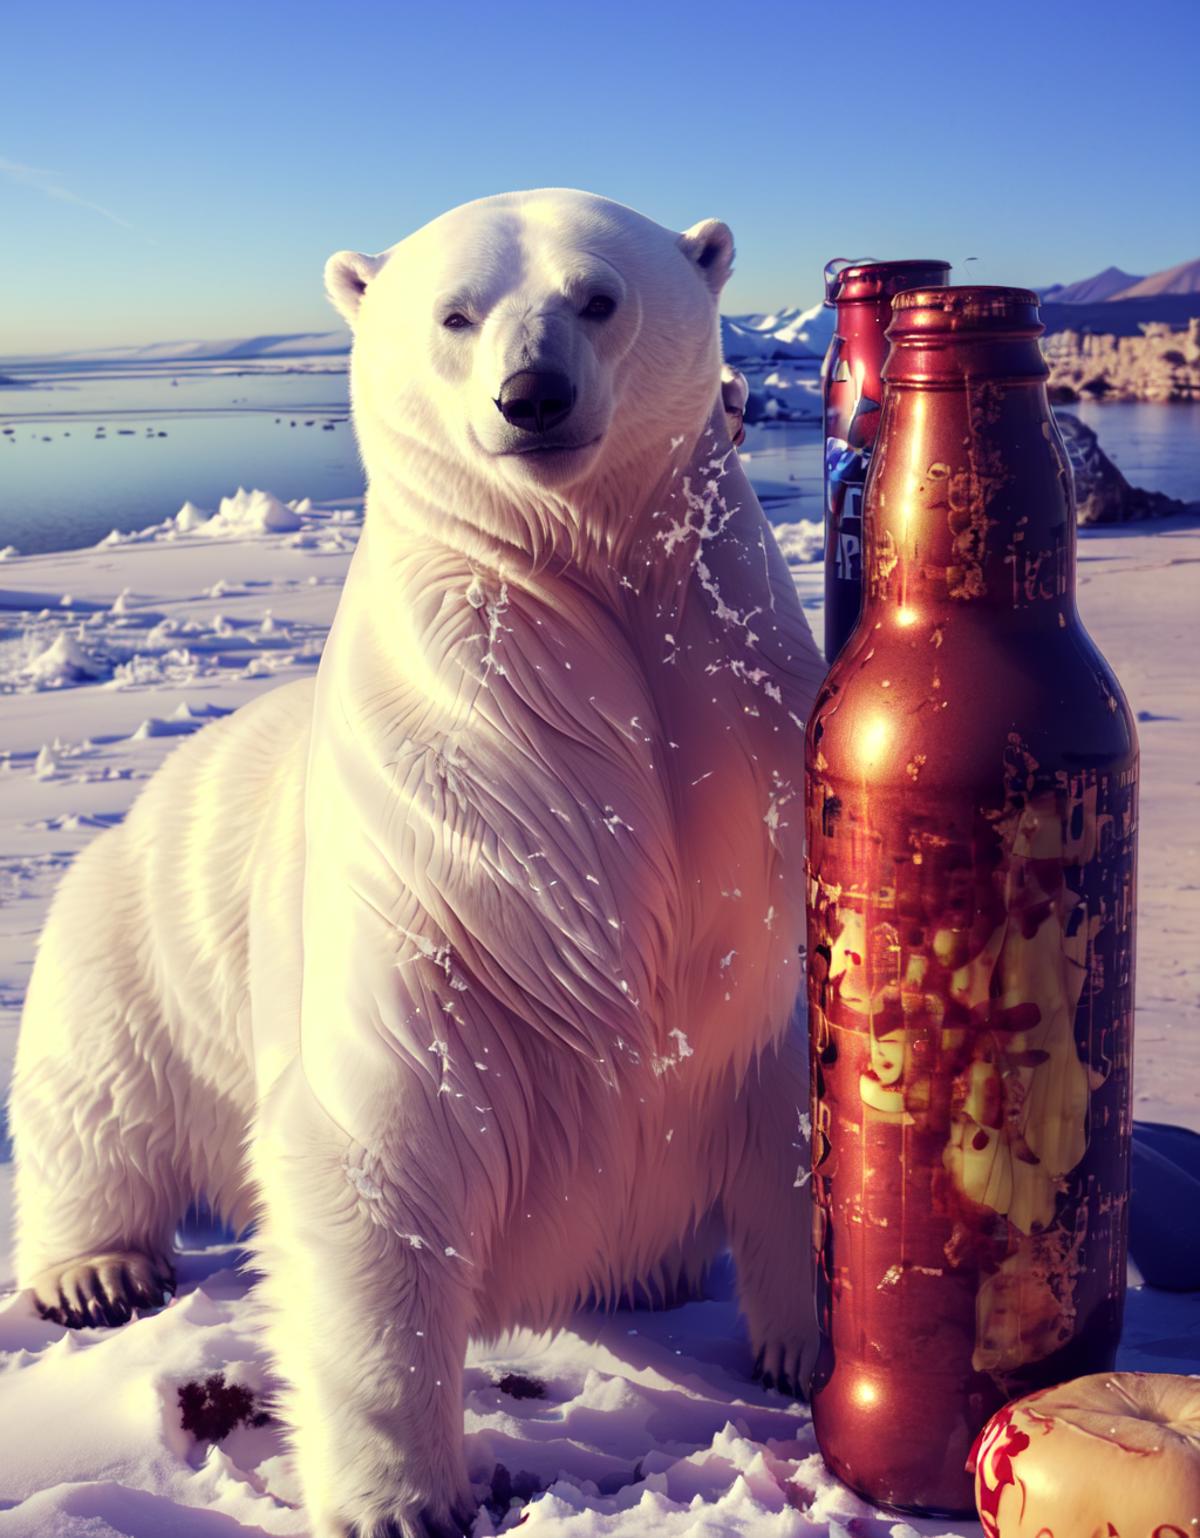 A white polar bear sitting in the snow next to a beer bottle.